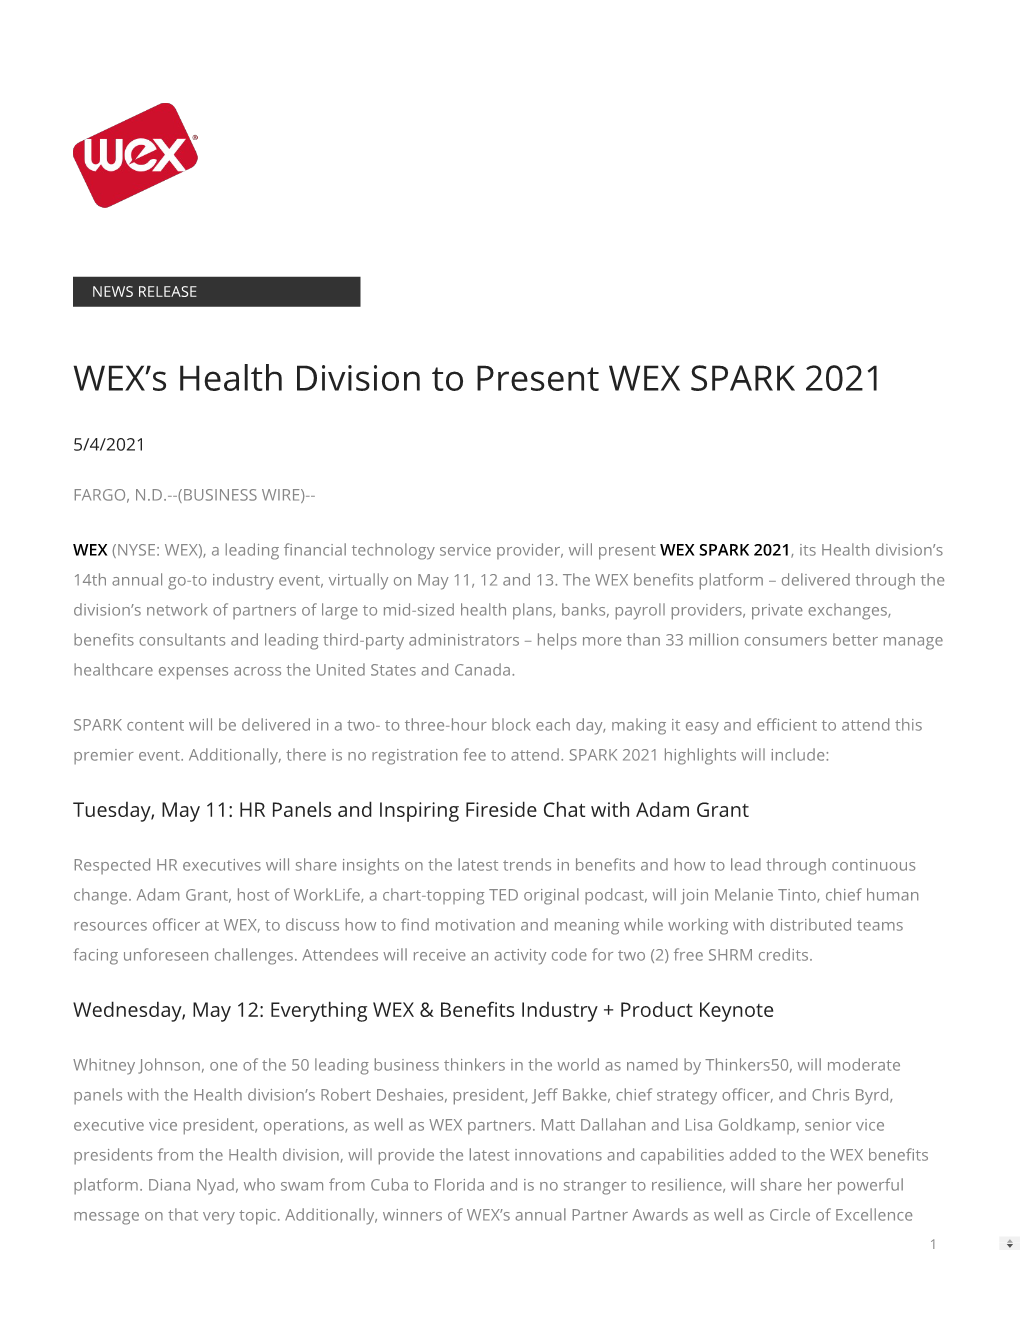 WEX's Health Division to Present WEX SPARK 2021